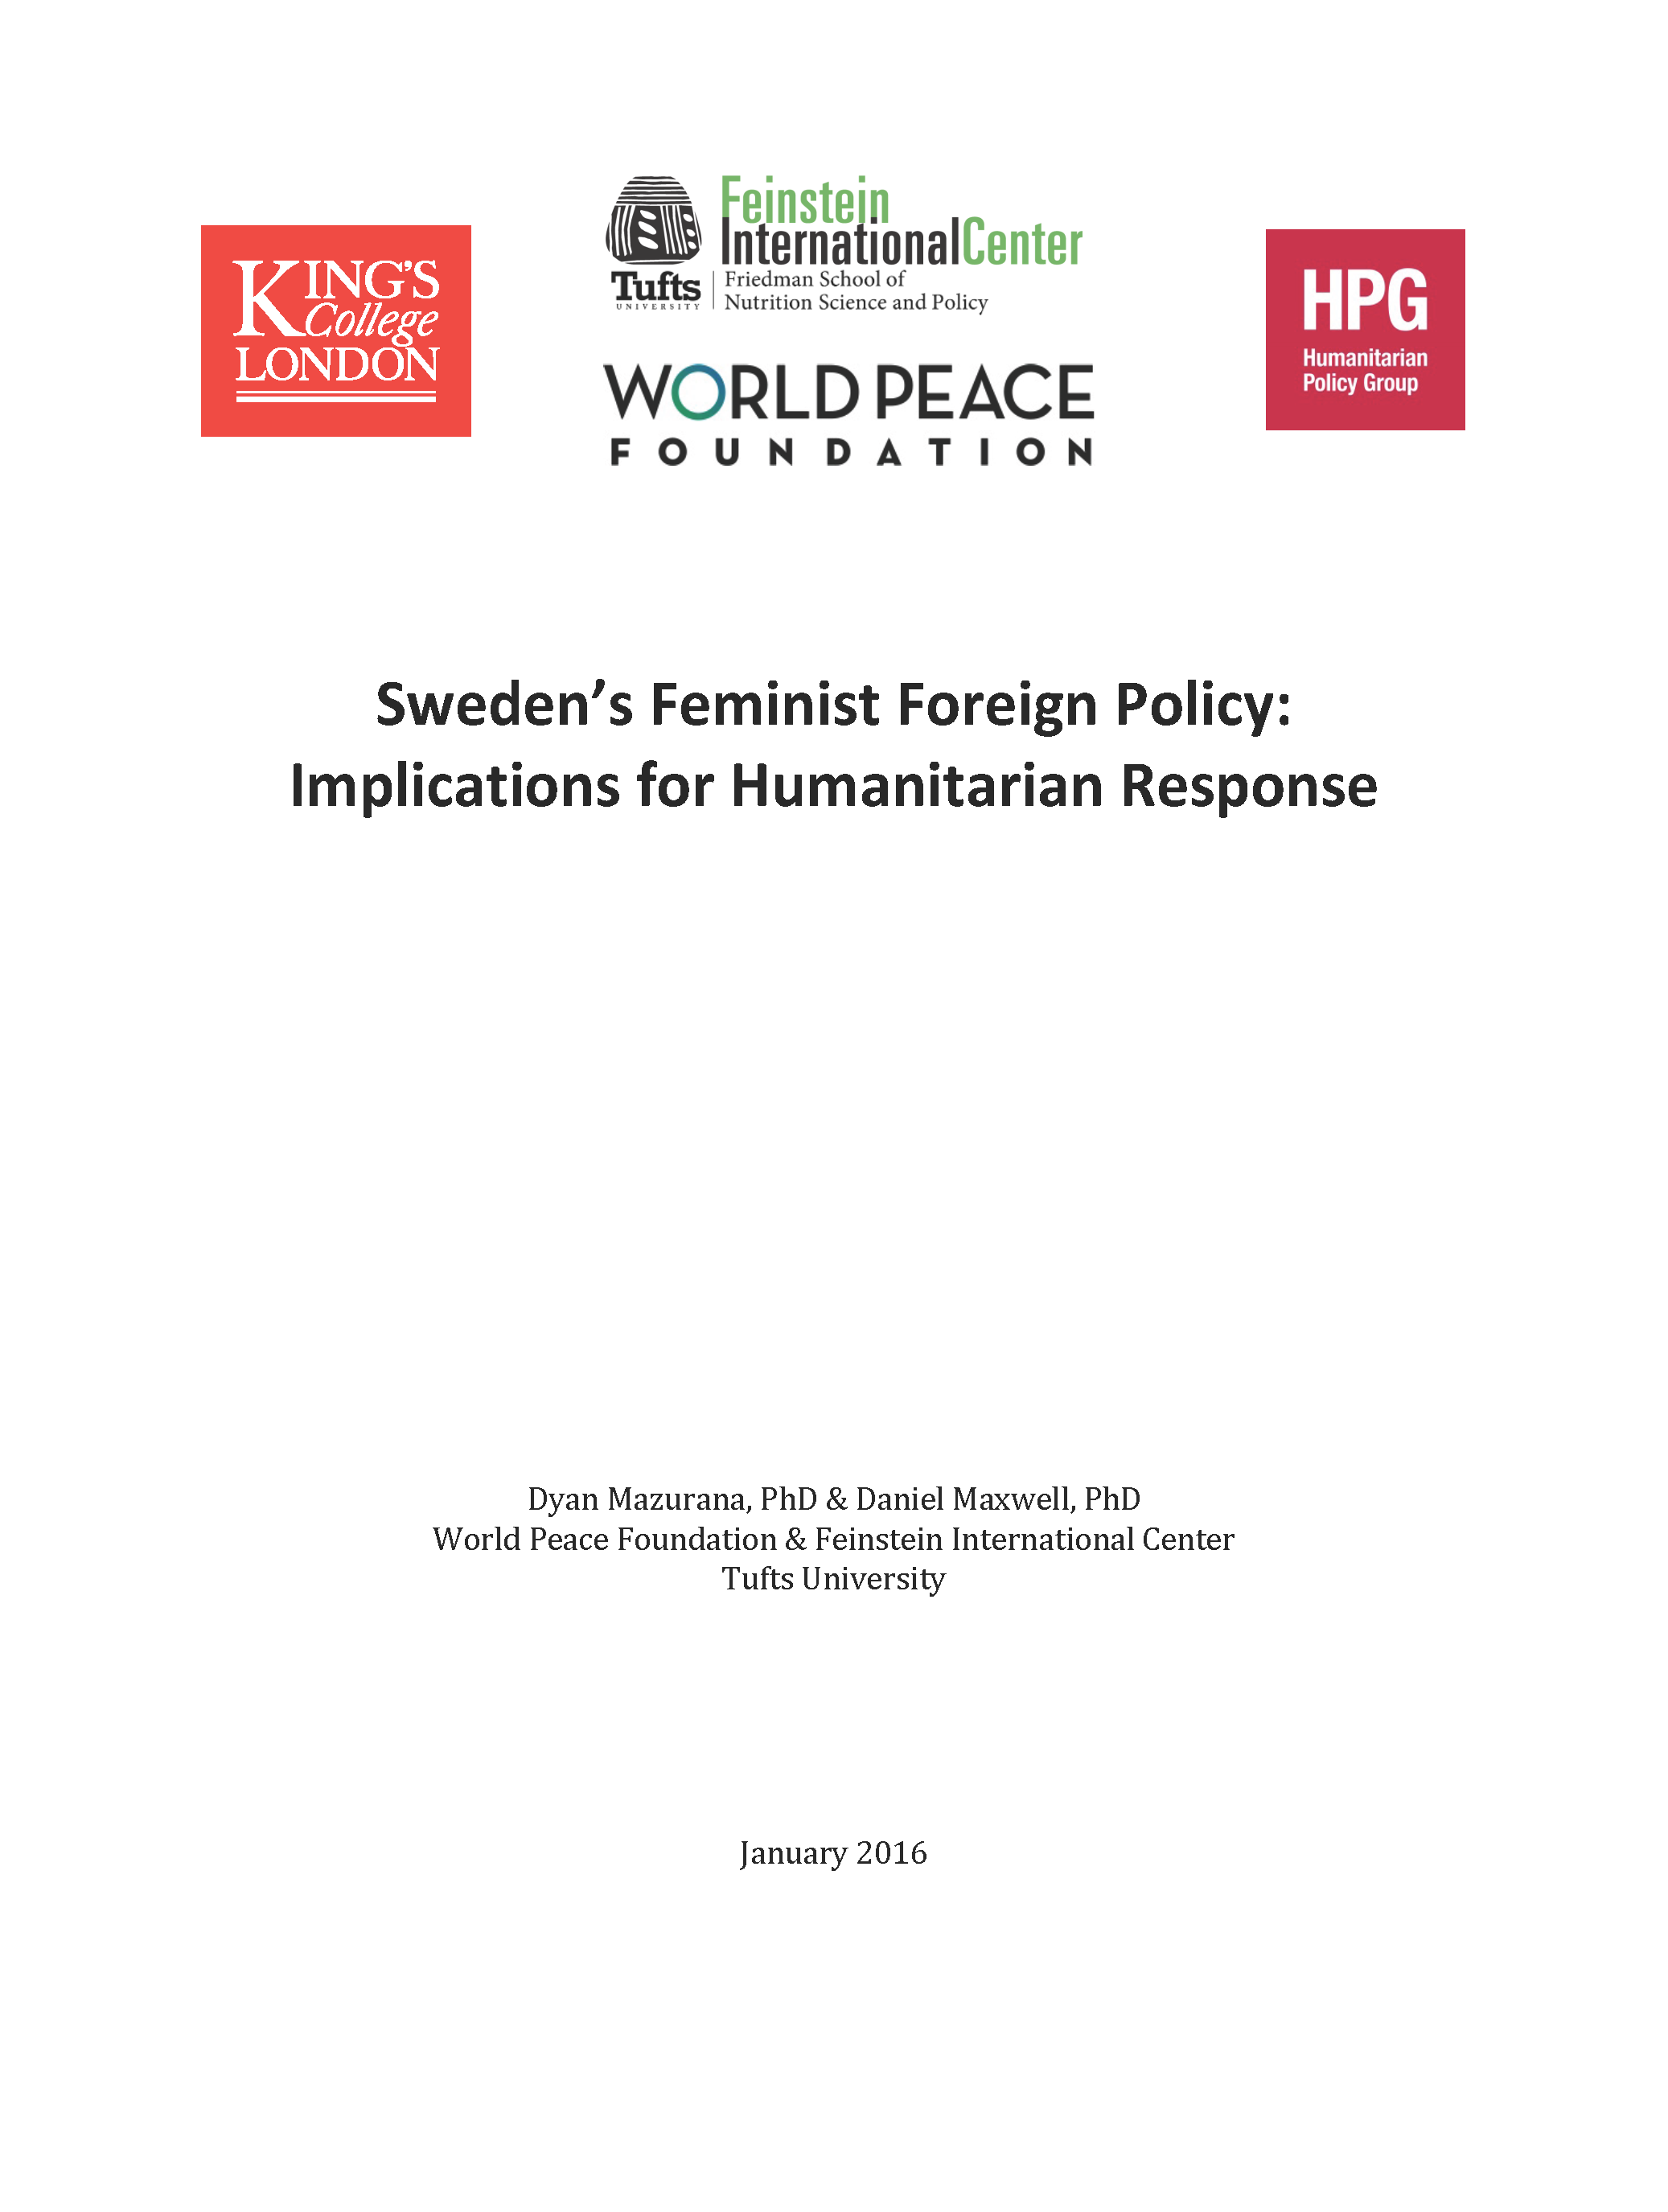 Sweden's feminist foreign policy